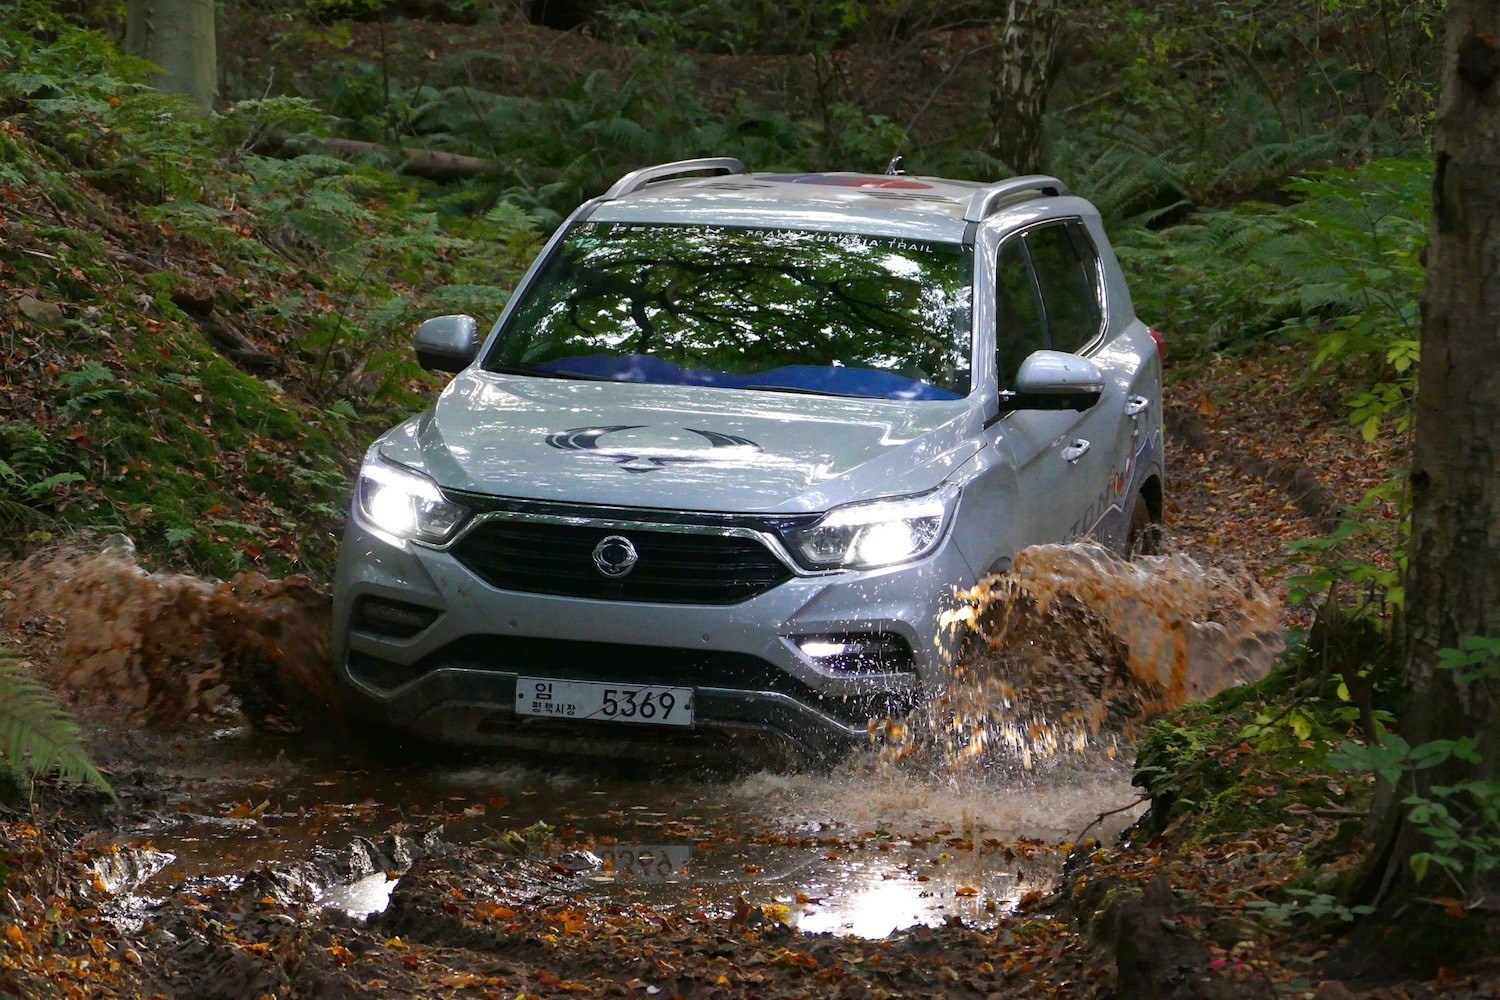 Tom Scanlan reviews the All-New SsangYong Rexton Ultimate 4×4 for Drive 24